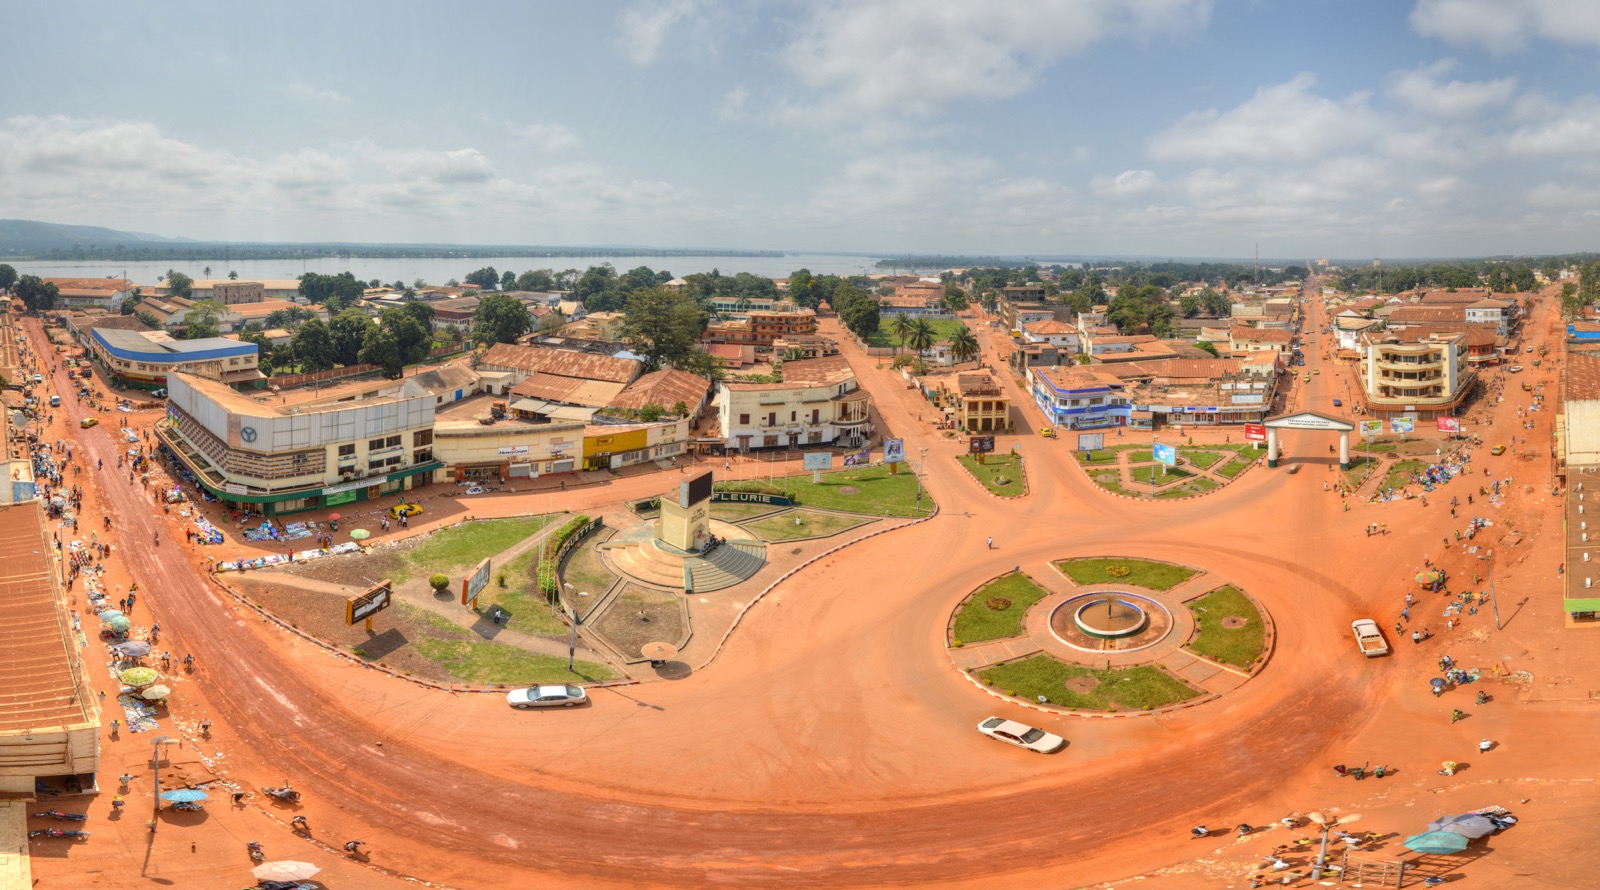 This City-Country Matching Quiz Gets Progressively Harder With Each Question – Can You Keep up With It? Bangui, Central African Republic